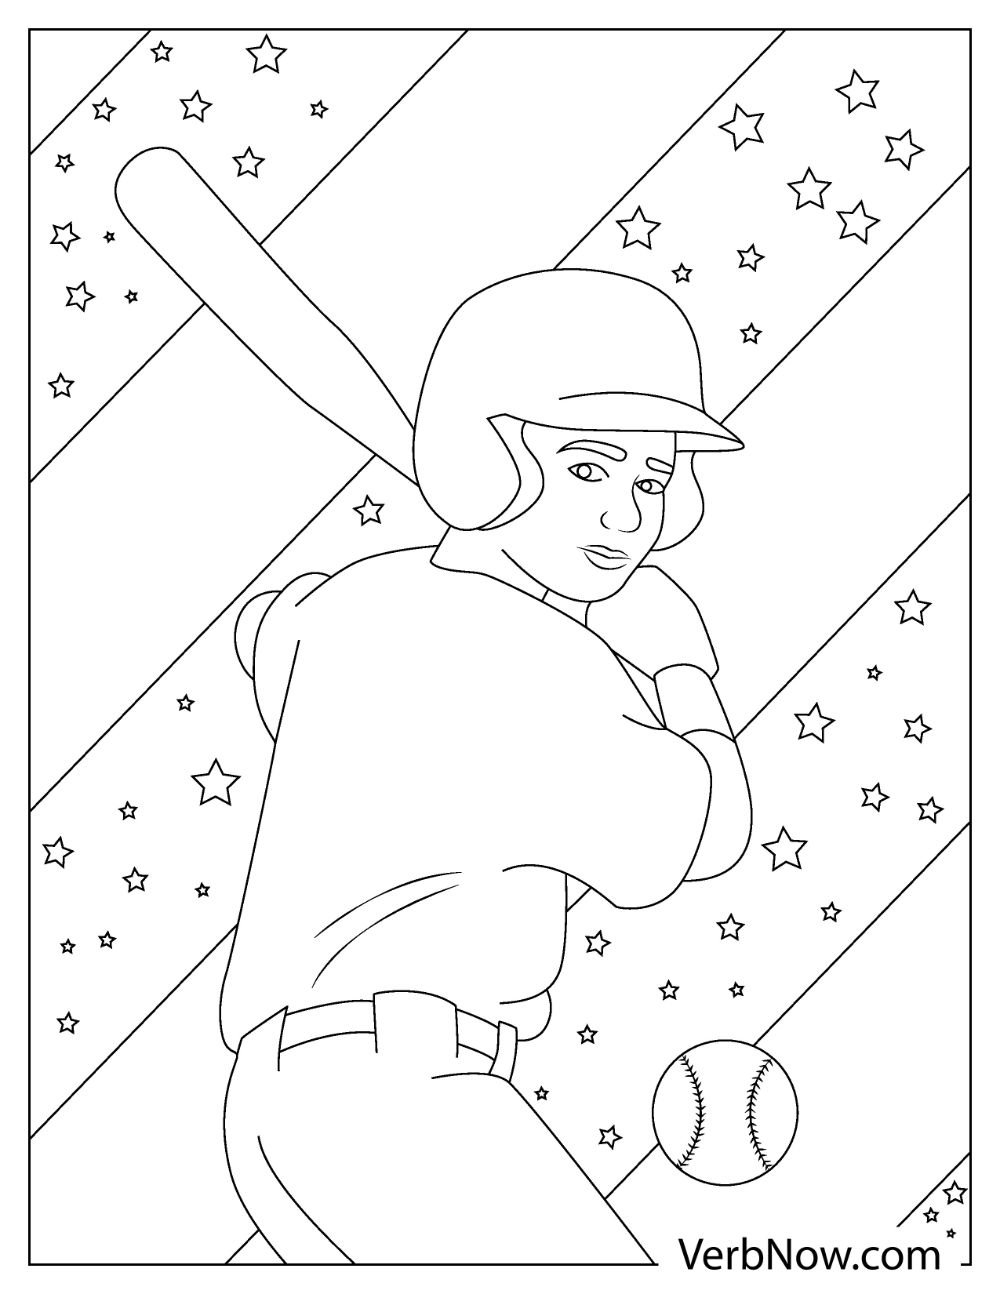 Free BASEBALL Coloring Pages & Book for Download (Printable PDF) - VerbNow